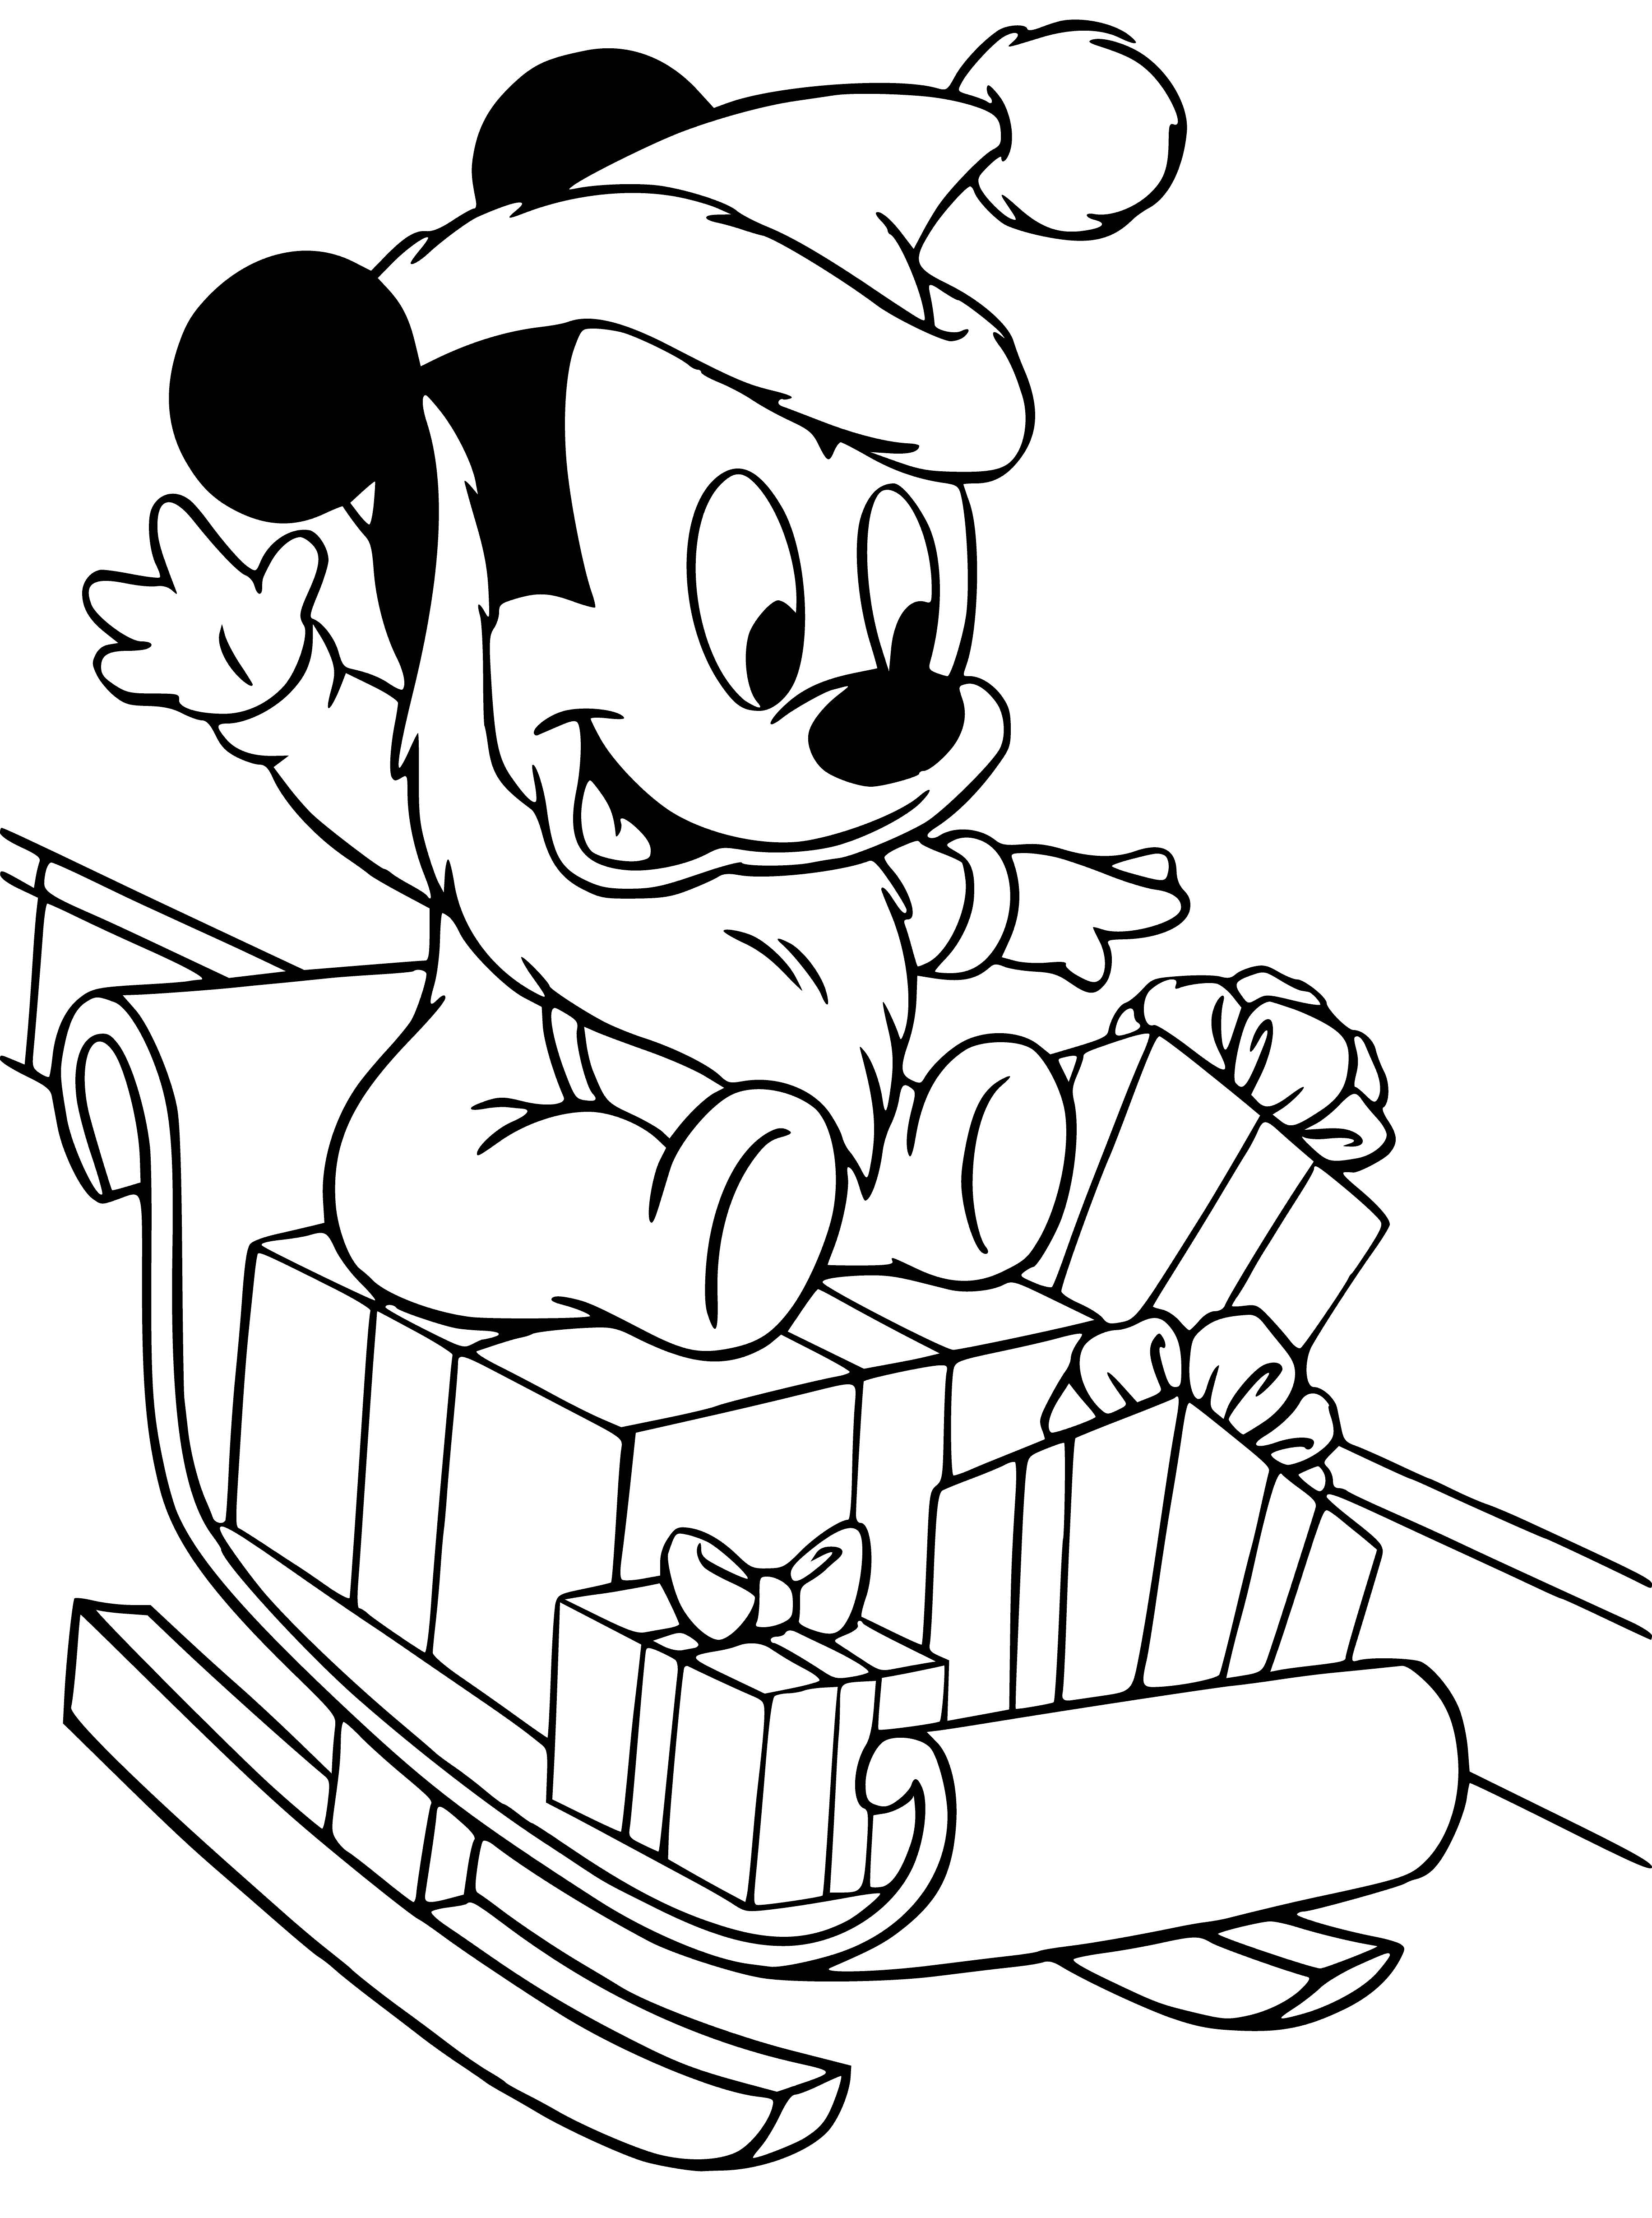 coloring page: Disney characters rejoice in a colorful scene, wishing a Happy New Year! Mickey, Donald, Goofy, Pluto, Chip & Dale all gather to celebrate.